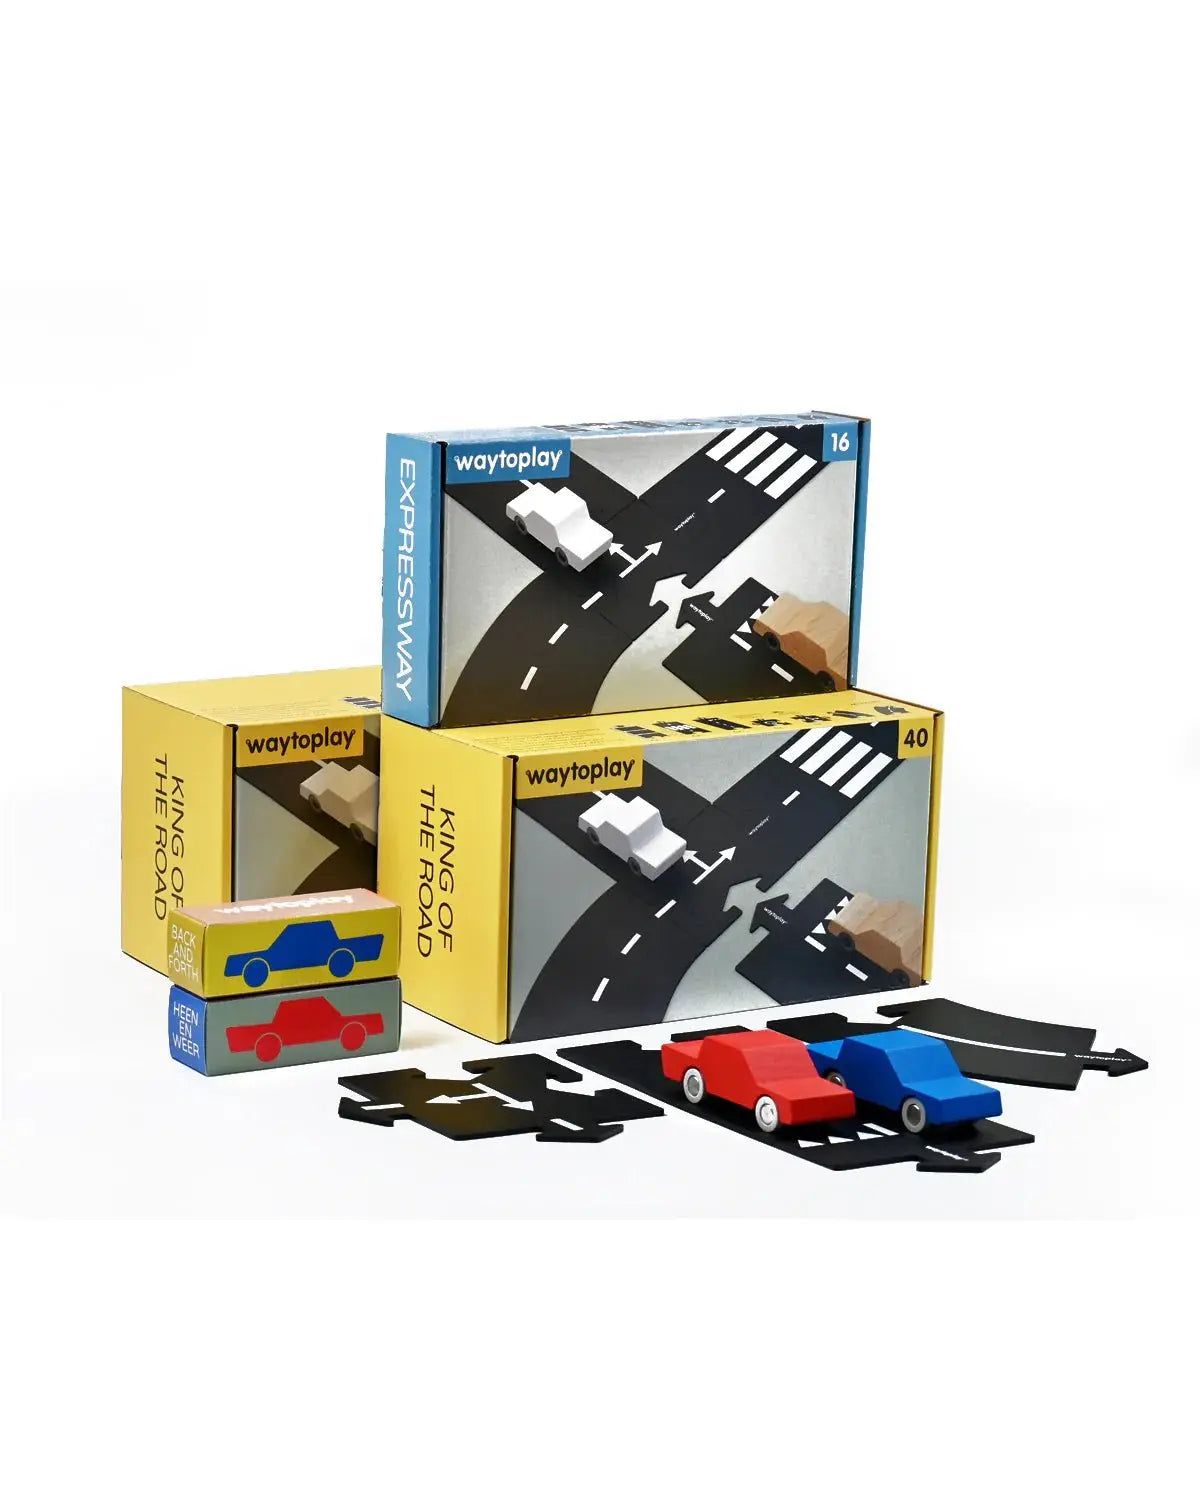 Road Track Deluxe Set Large, Waytoplay Compatible, Toy Car Track Set, Fun Playtime, Kids Gift  Waytoplay   